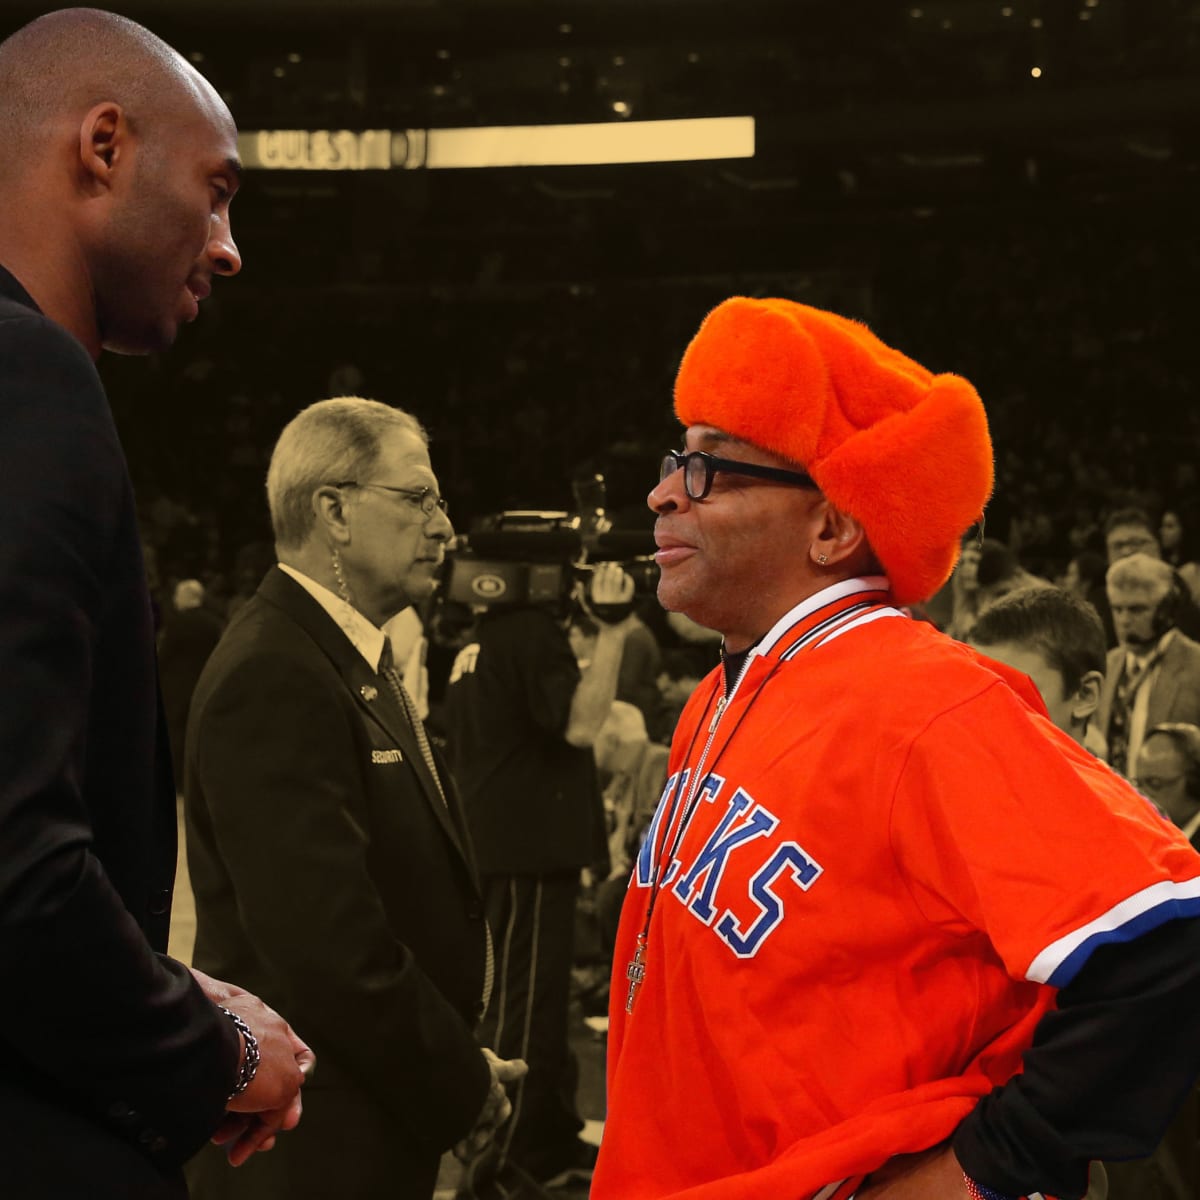 Spike Lee arriving for the New York Knicks basketball game against